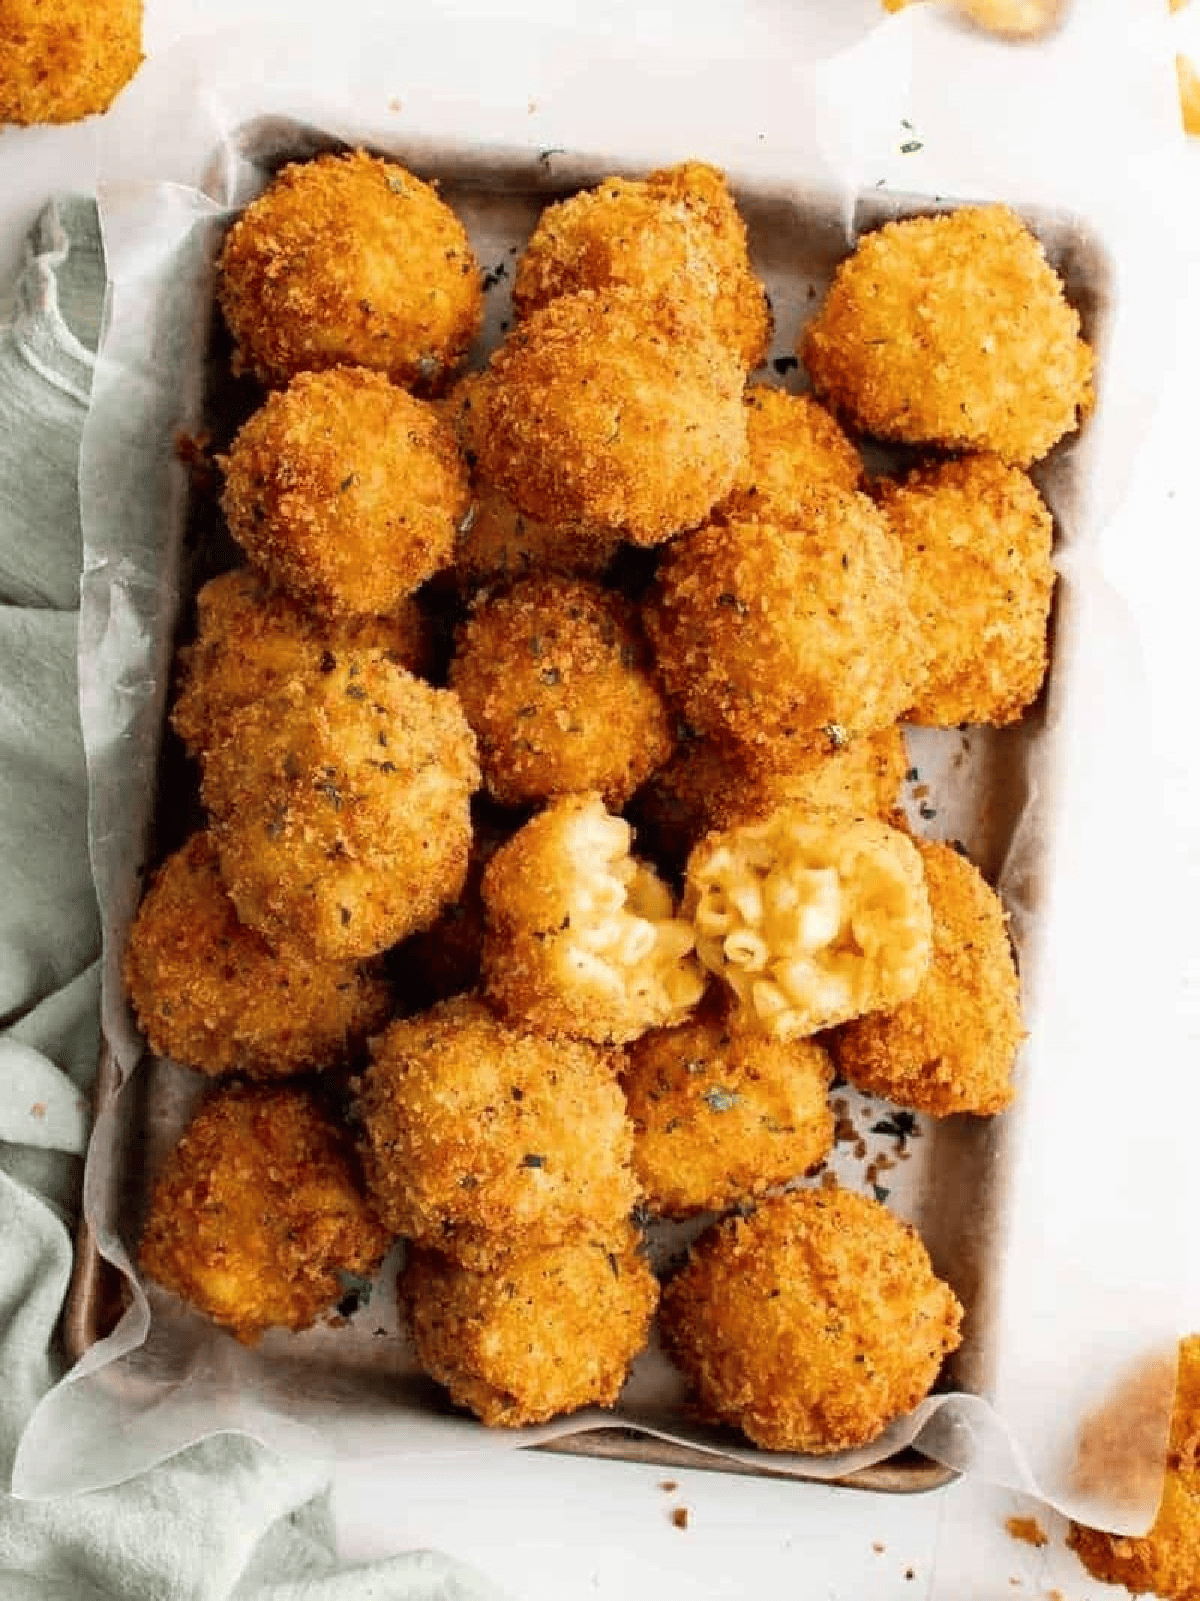 Mac and cheese balls baked in a dish.